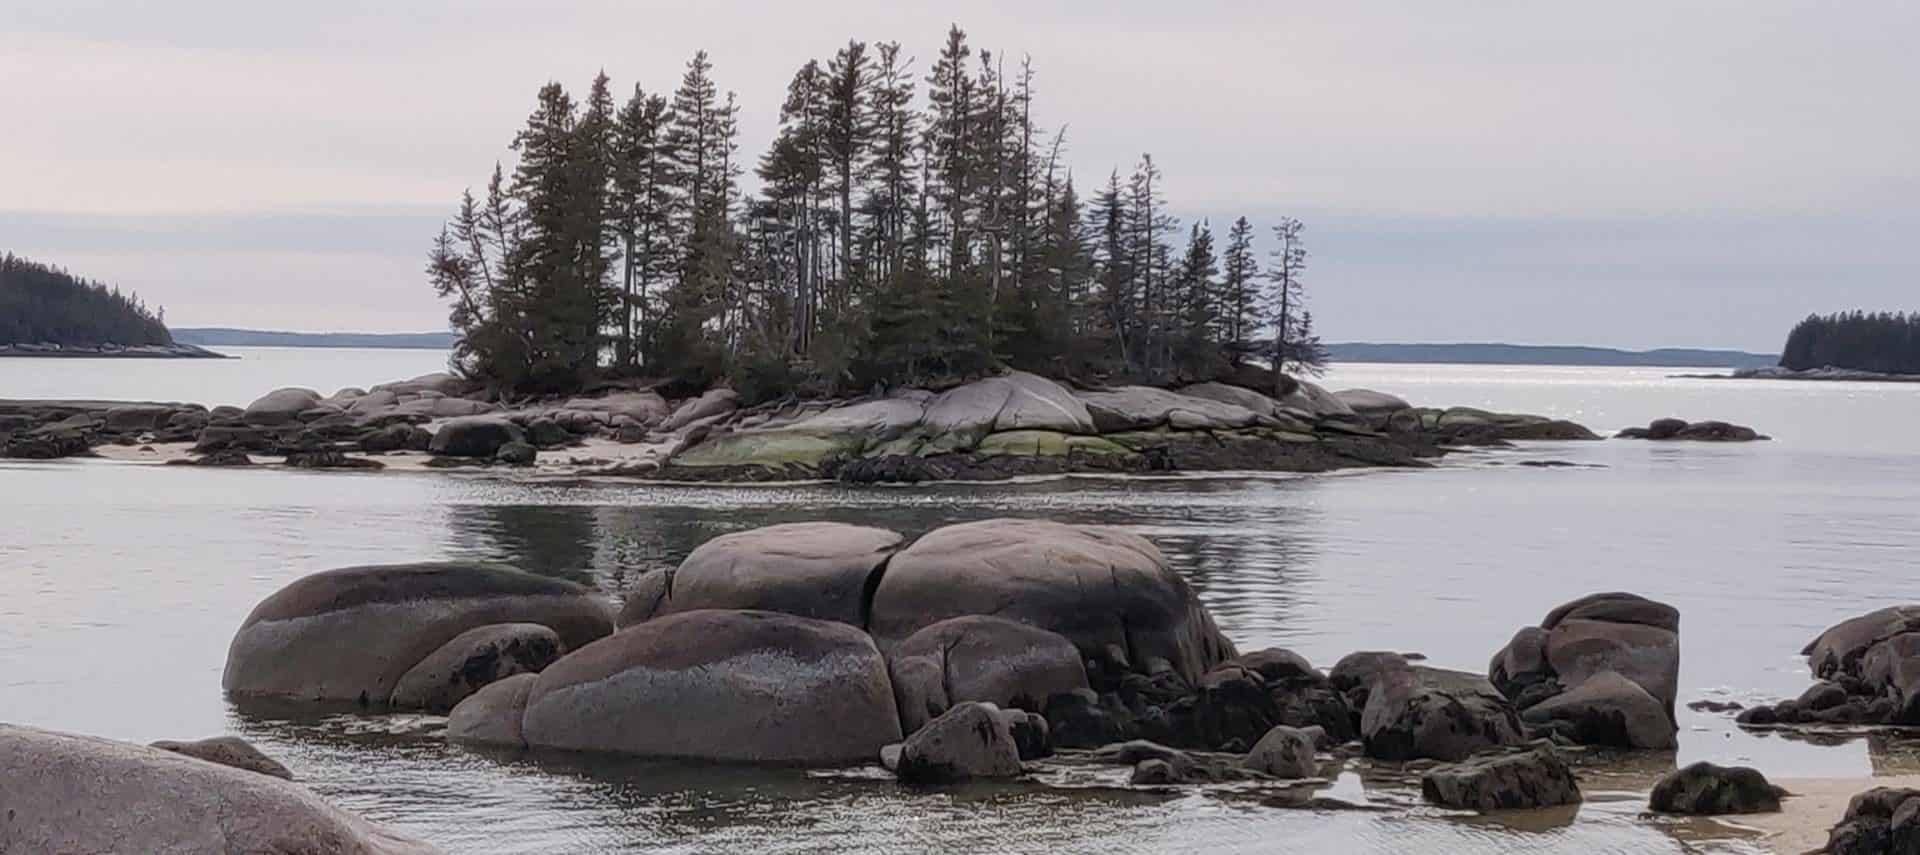 Small island of rocks and trees surrounded by water with large boulders in the water and trees and hills in the background